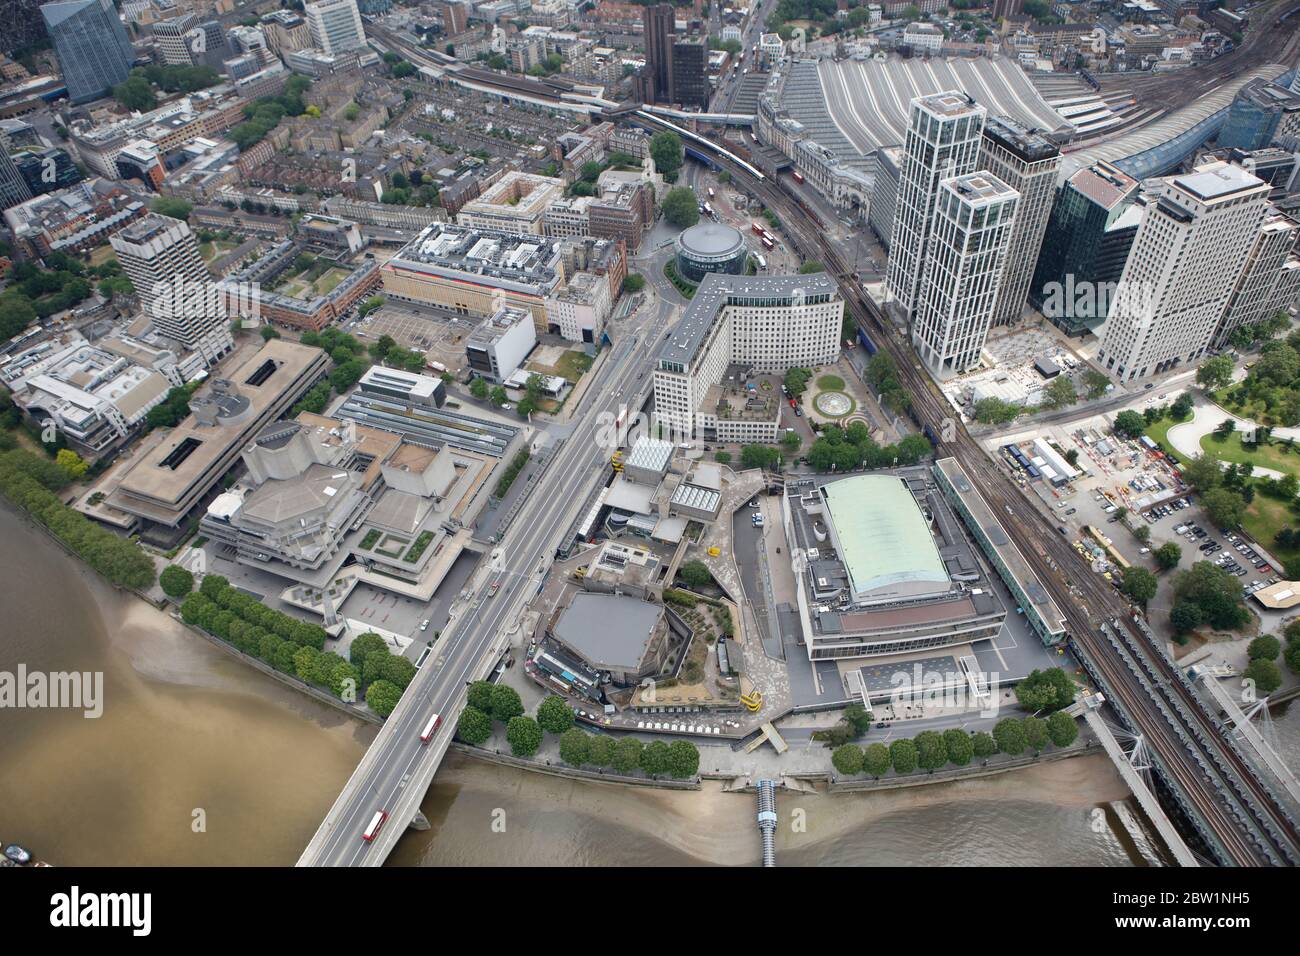 Aerial View of the Area around Waterloo and Waterloo Station, London, UK Stock Photo